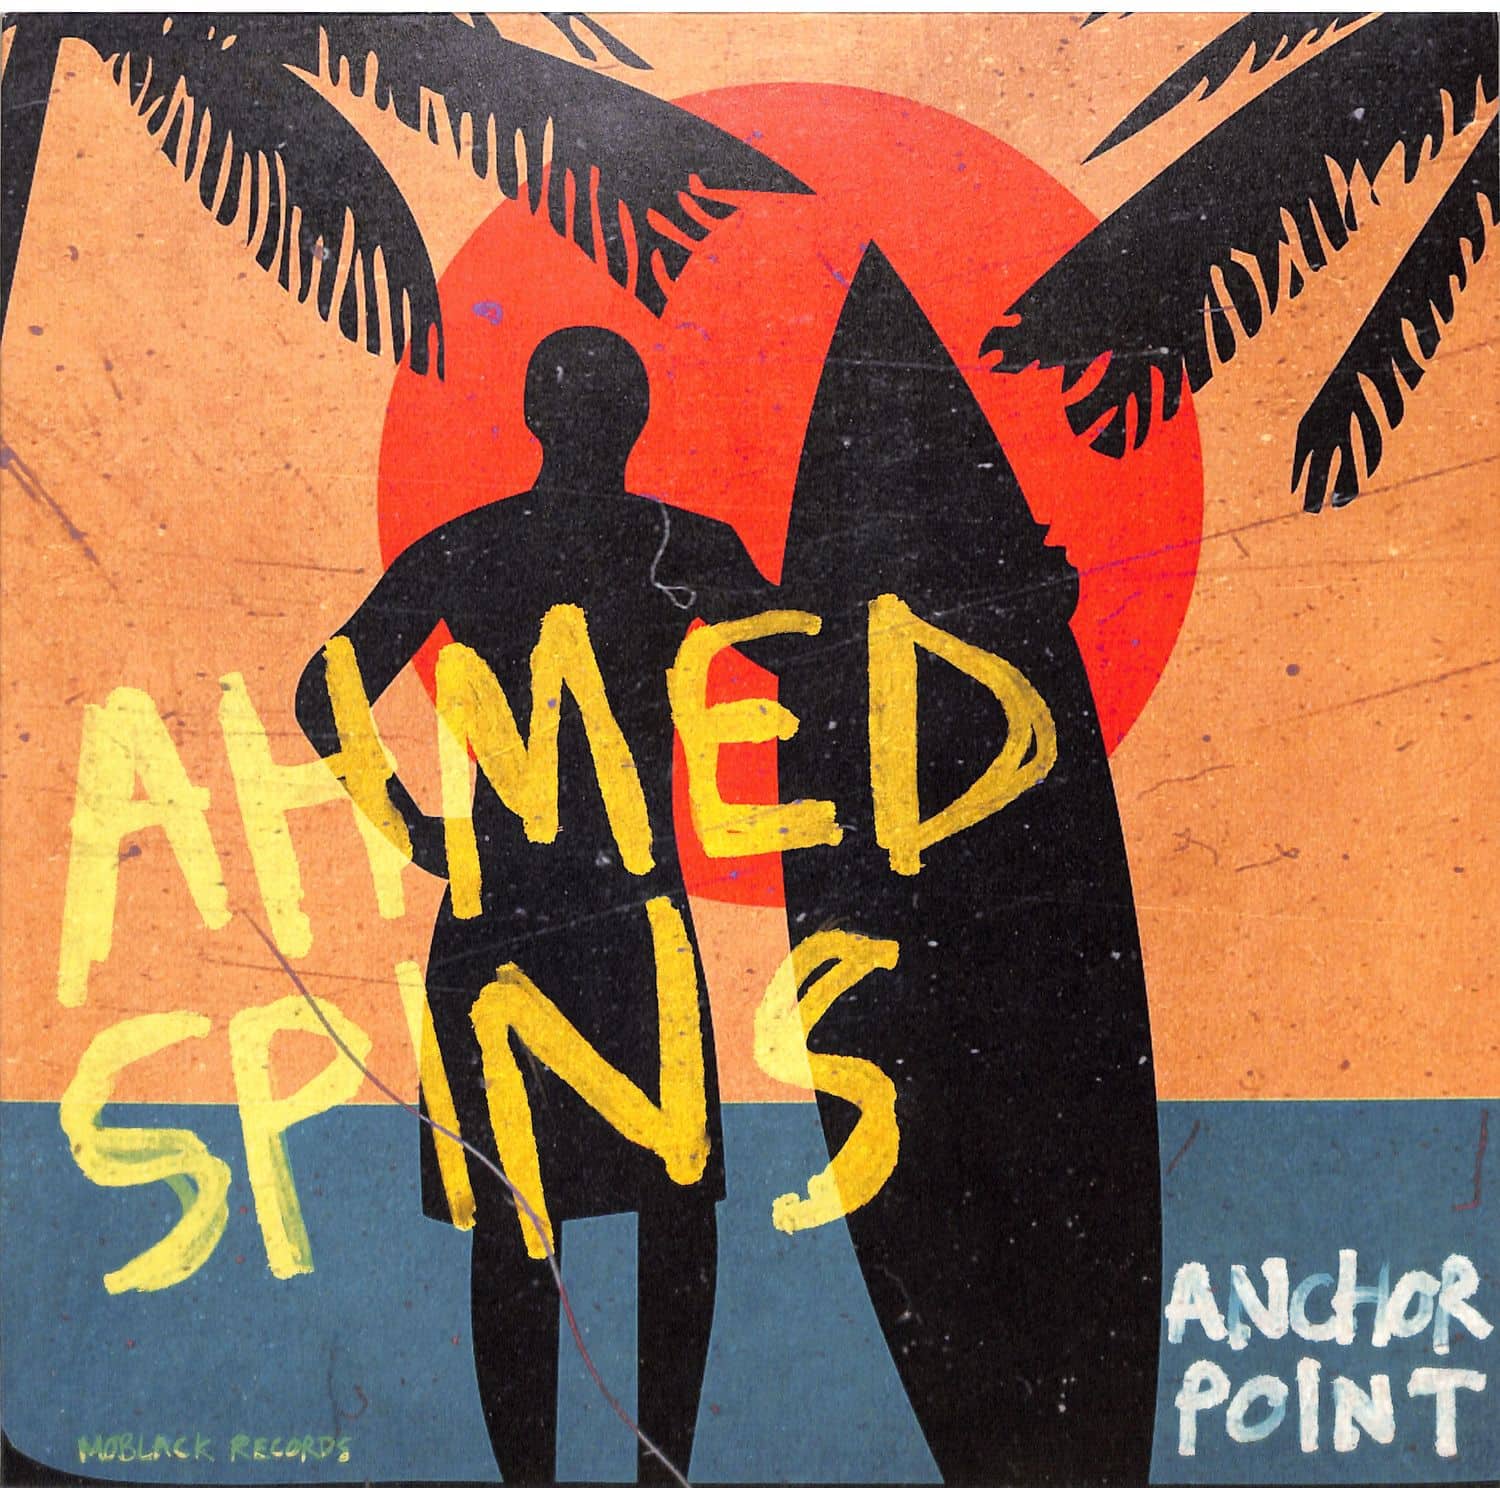 Ahmed Spins - ANCHOR POINT EP